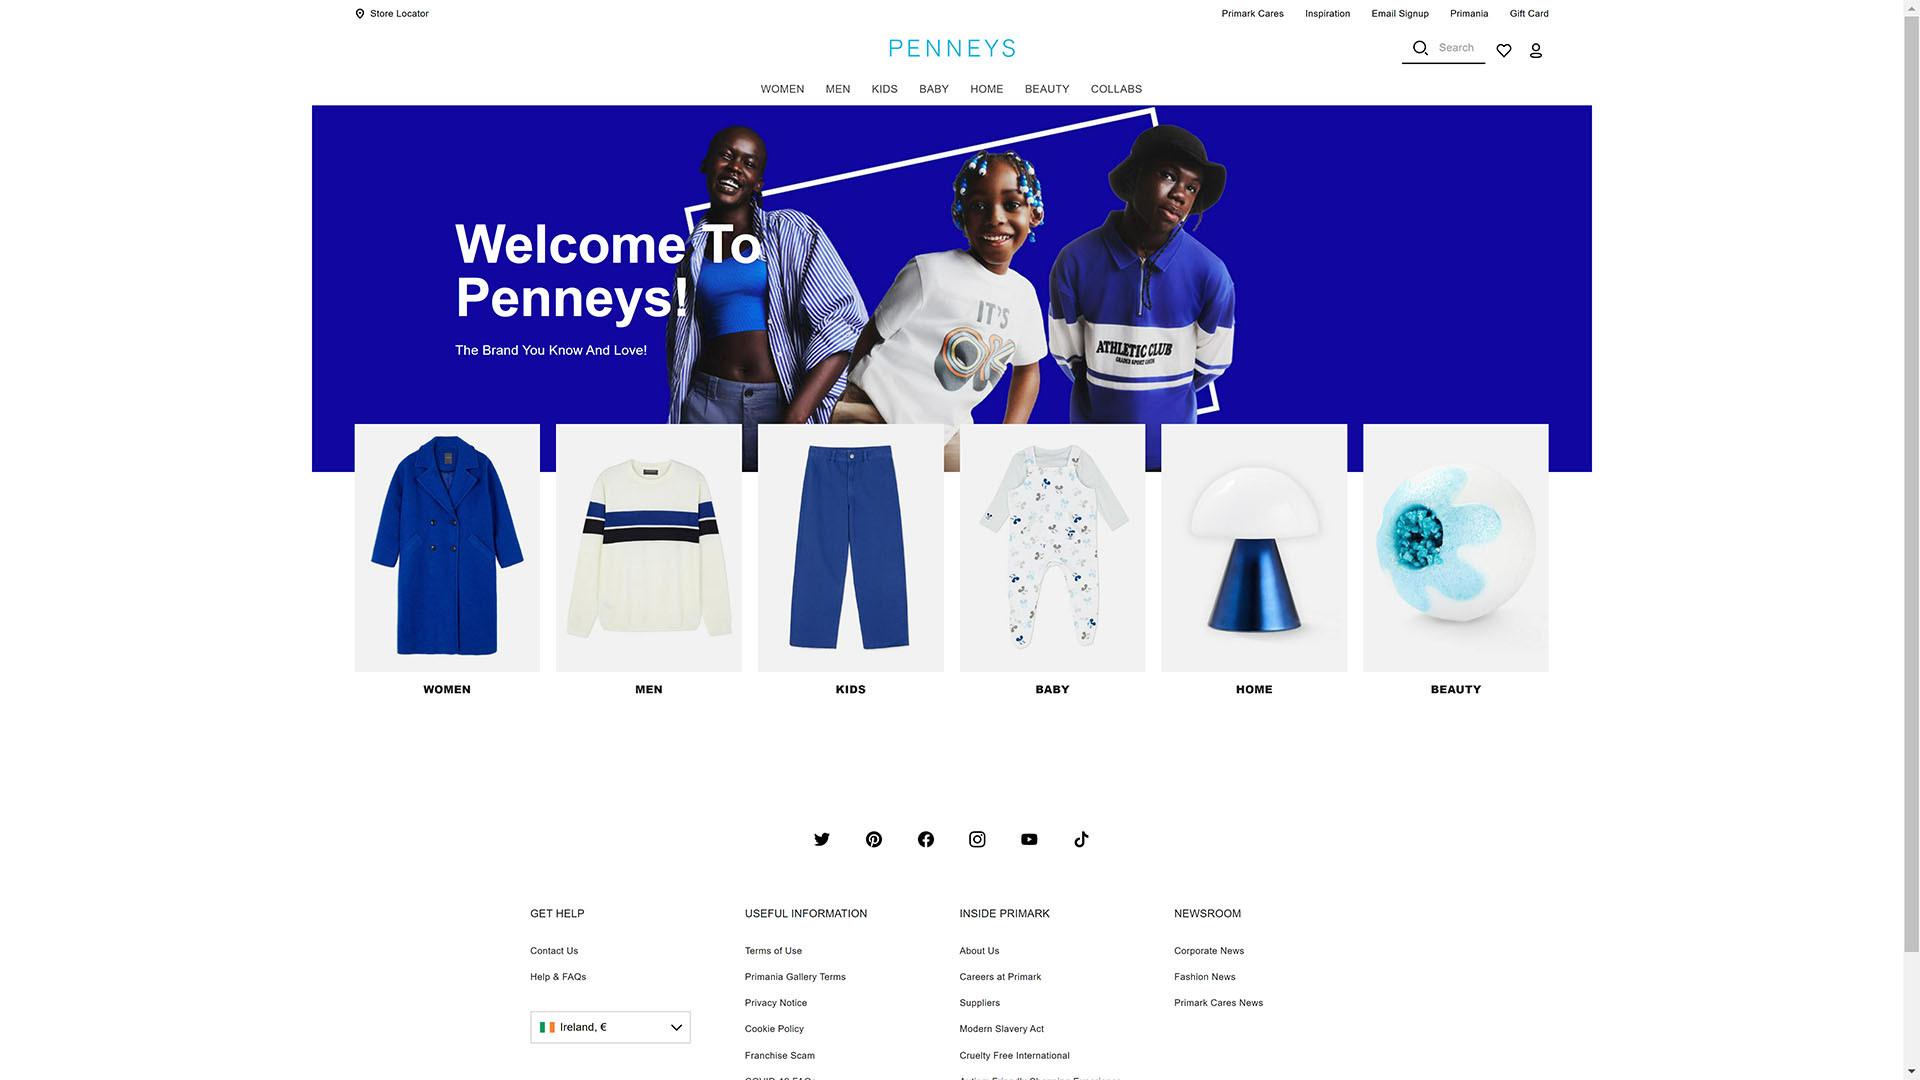 Penneys website homepage - Penneys launches new website in Ireland